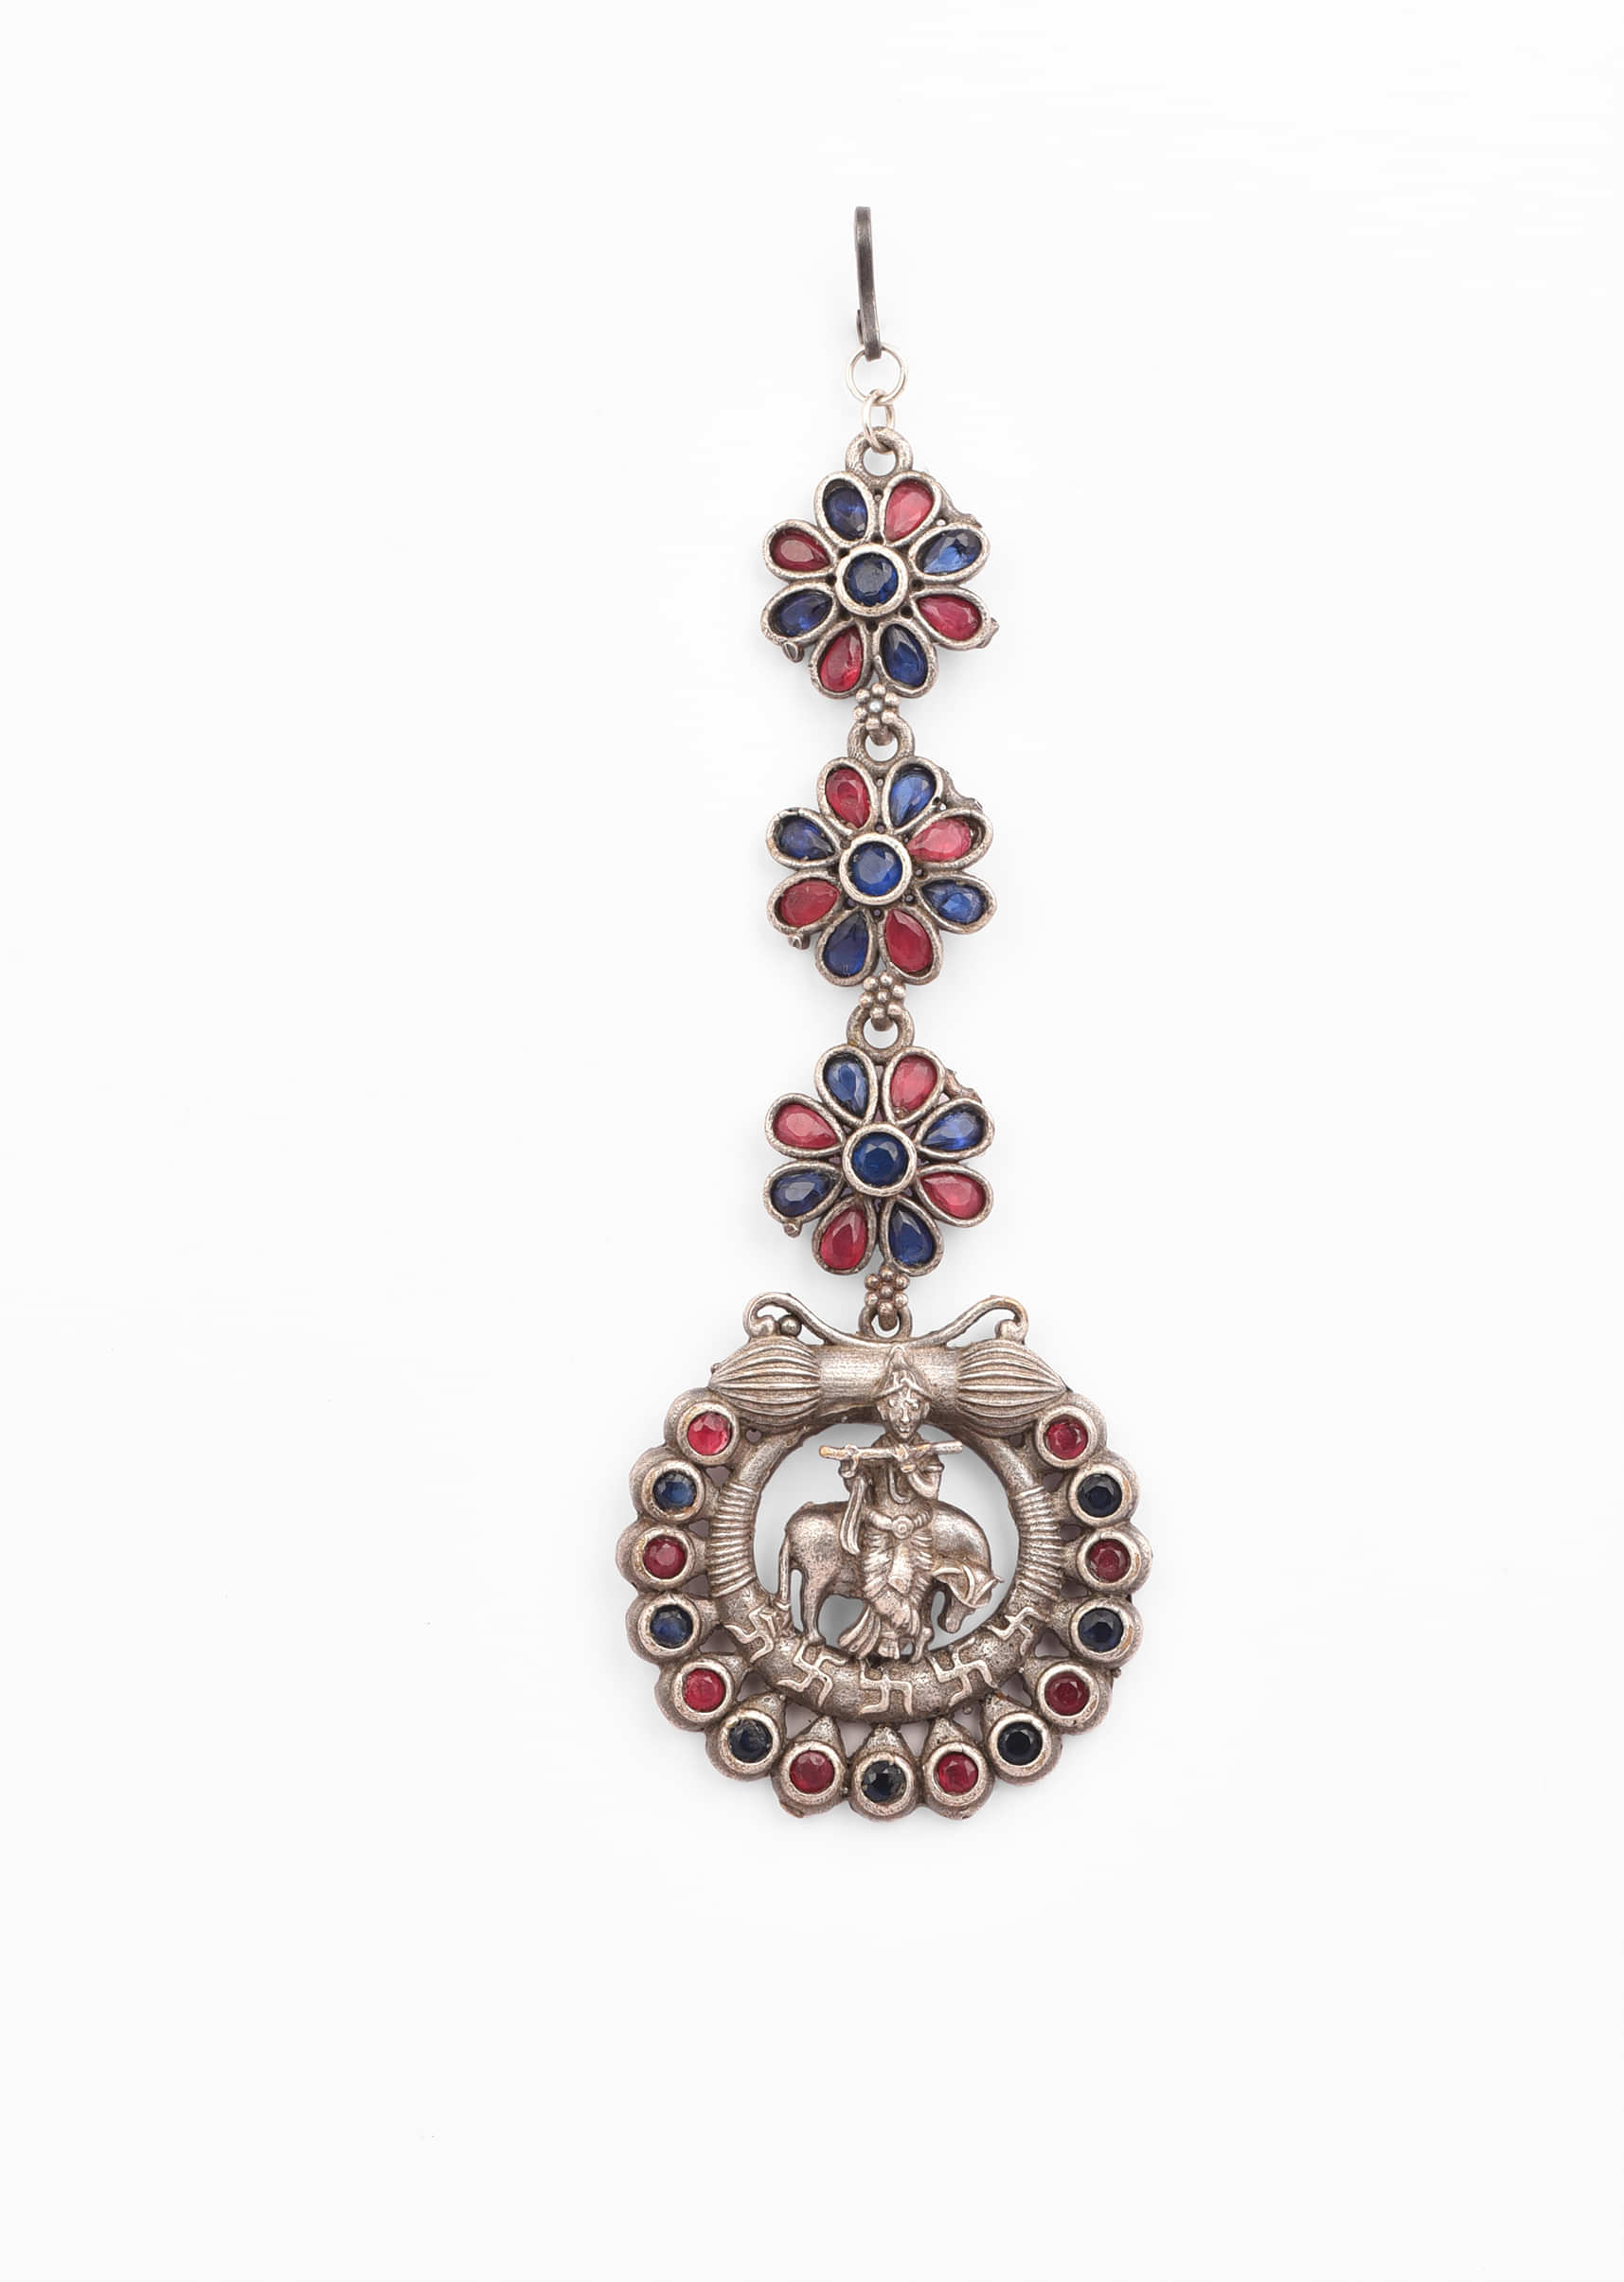 Oxidised Silver Mangtika With Carved Lord Krishna Motif Studded In Pink And Blue Stones 